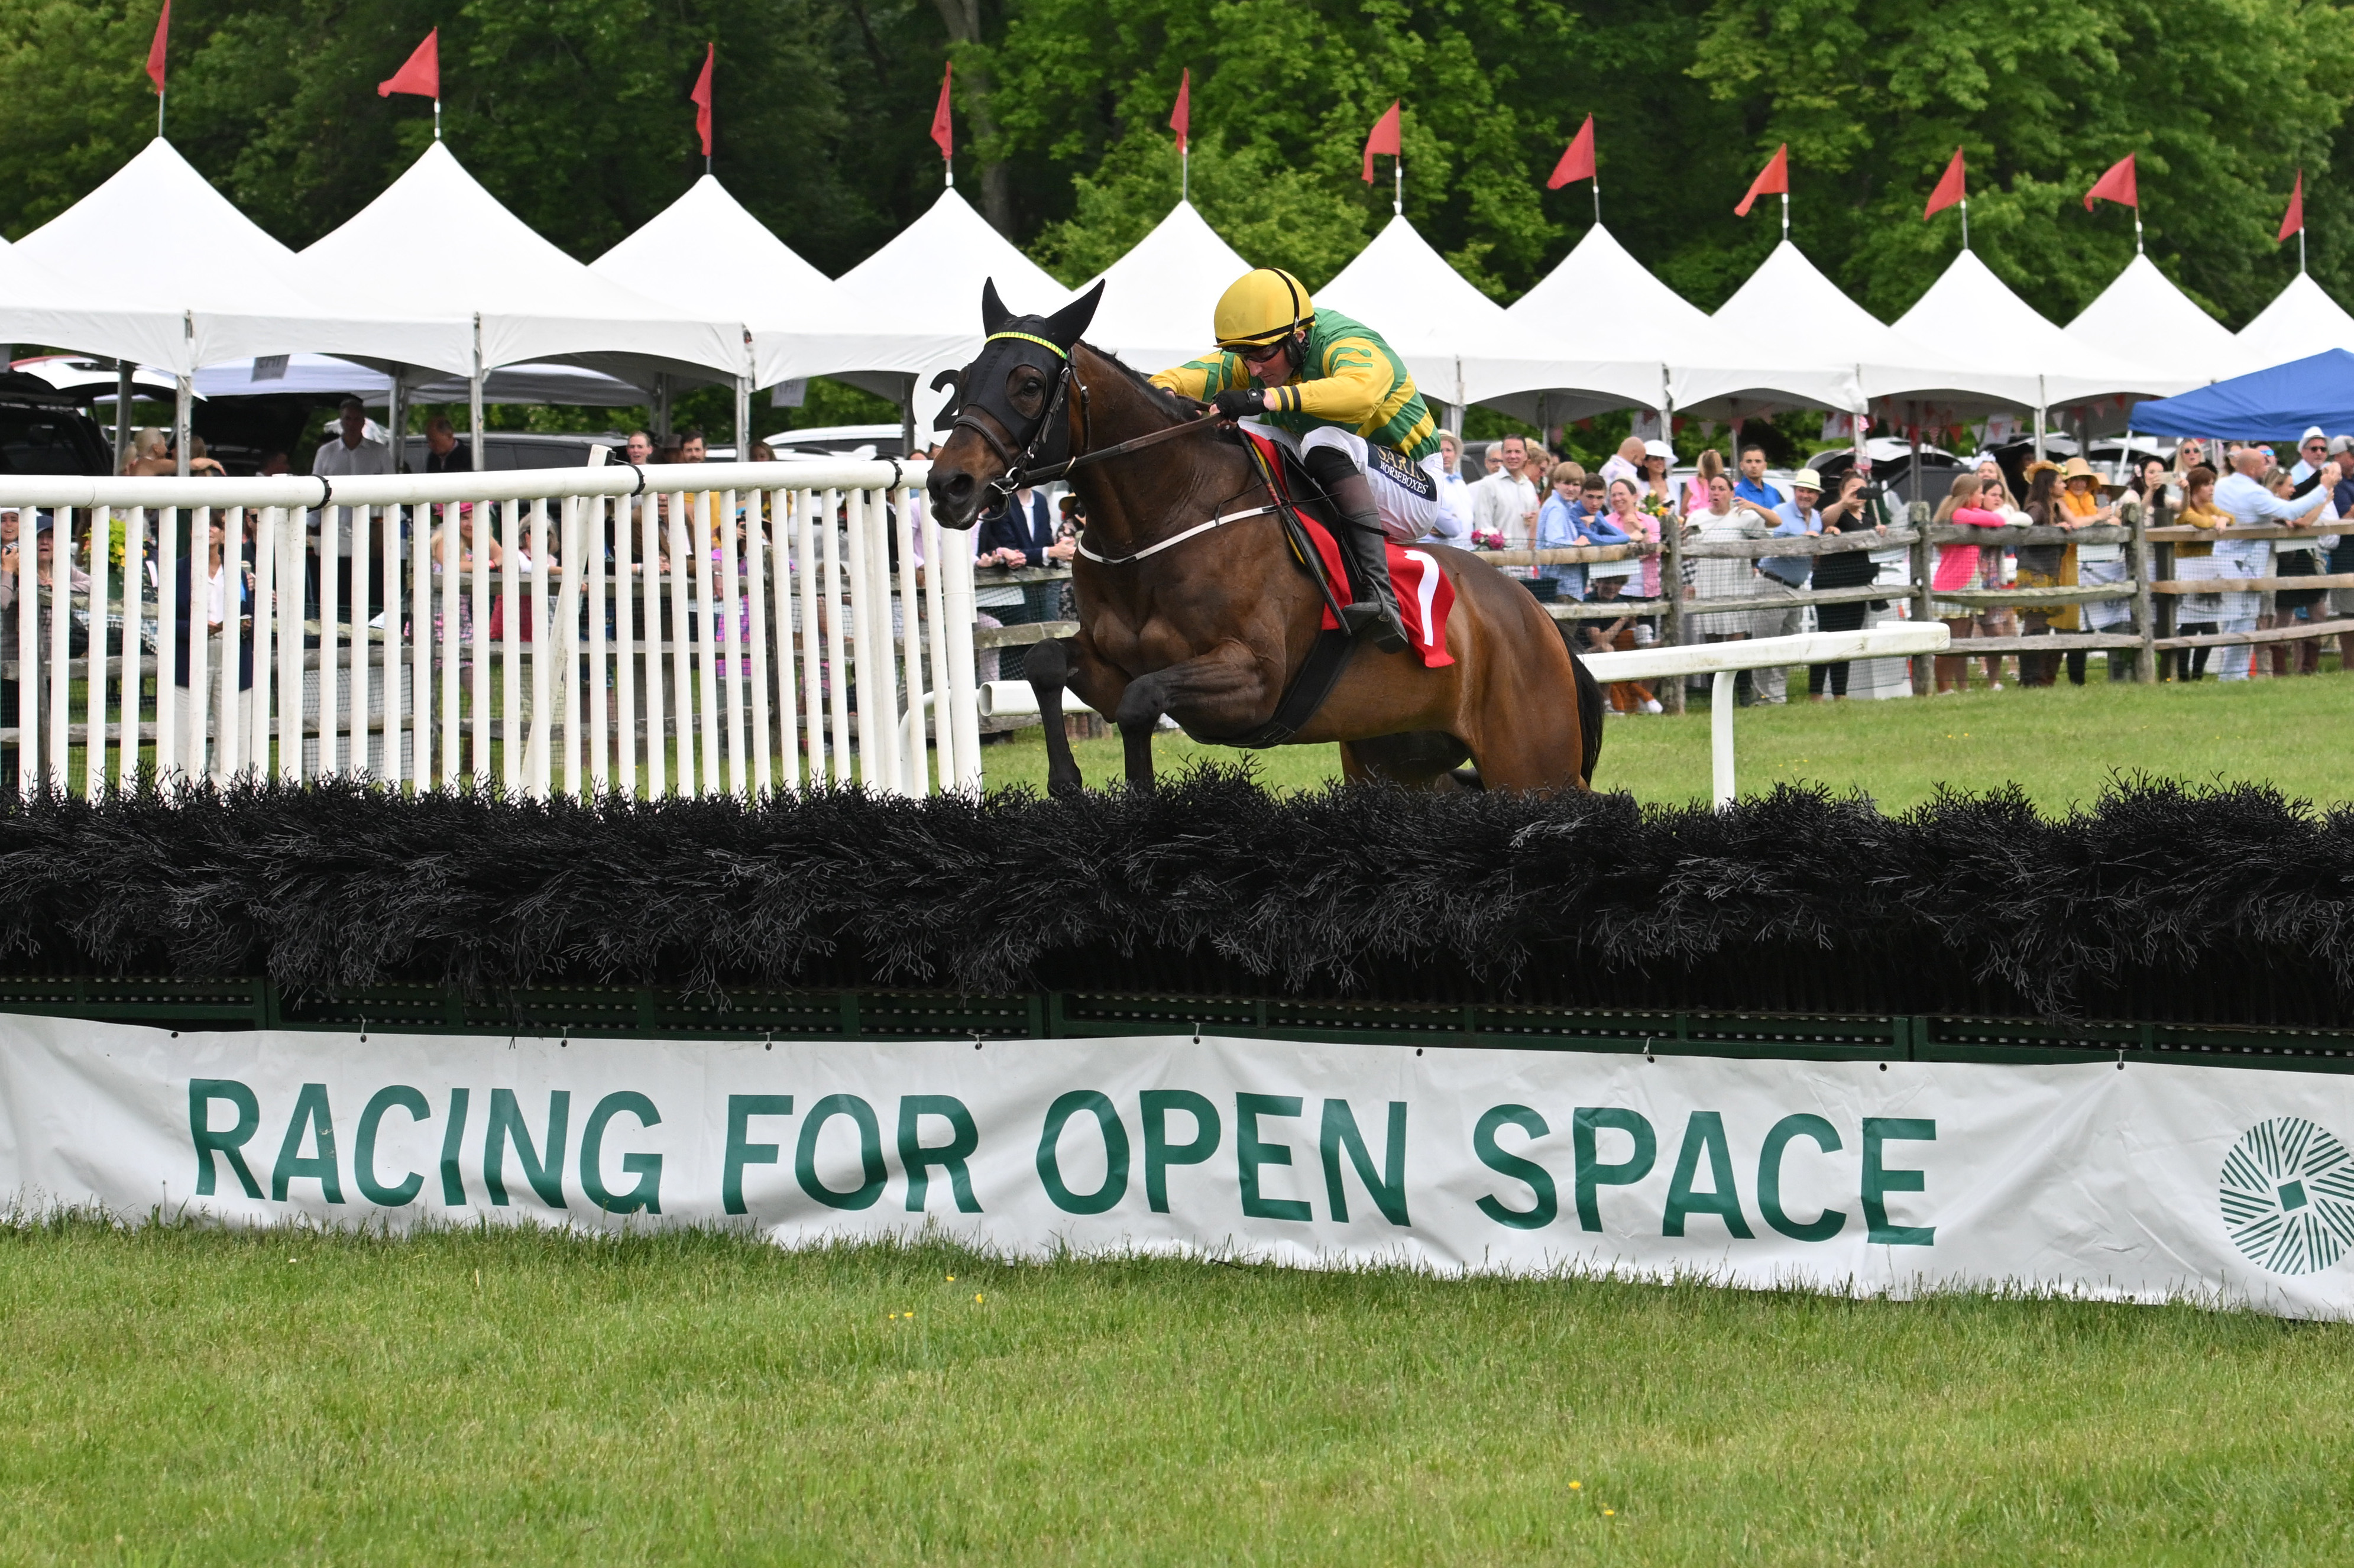 a wide angle photo of a jockey on horseback jumping over a banner reading "Racing for Open Space"